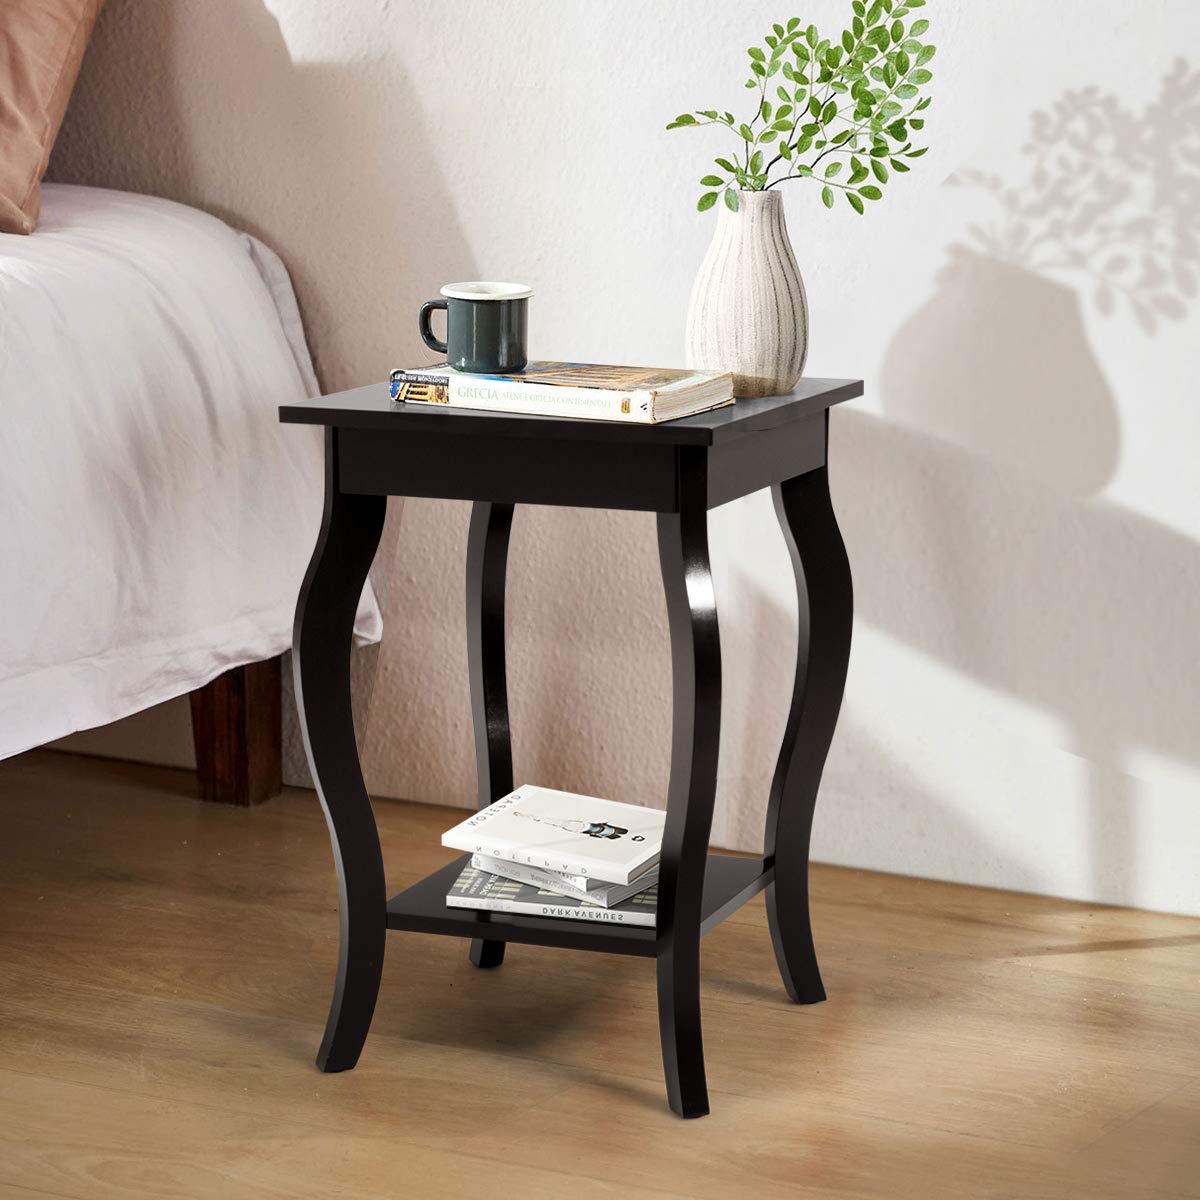 16" End Table W/Storage & Shelf Curved Legs Home Furniture for Living Room